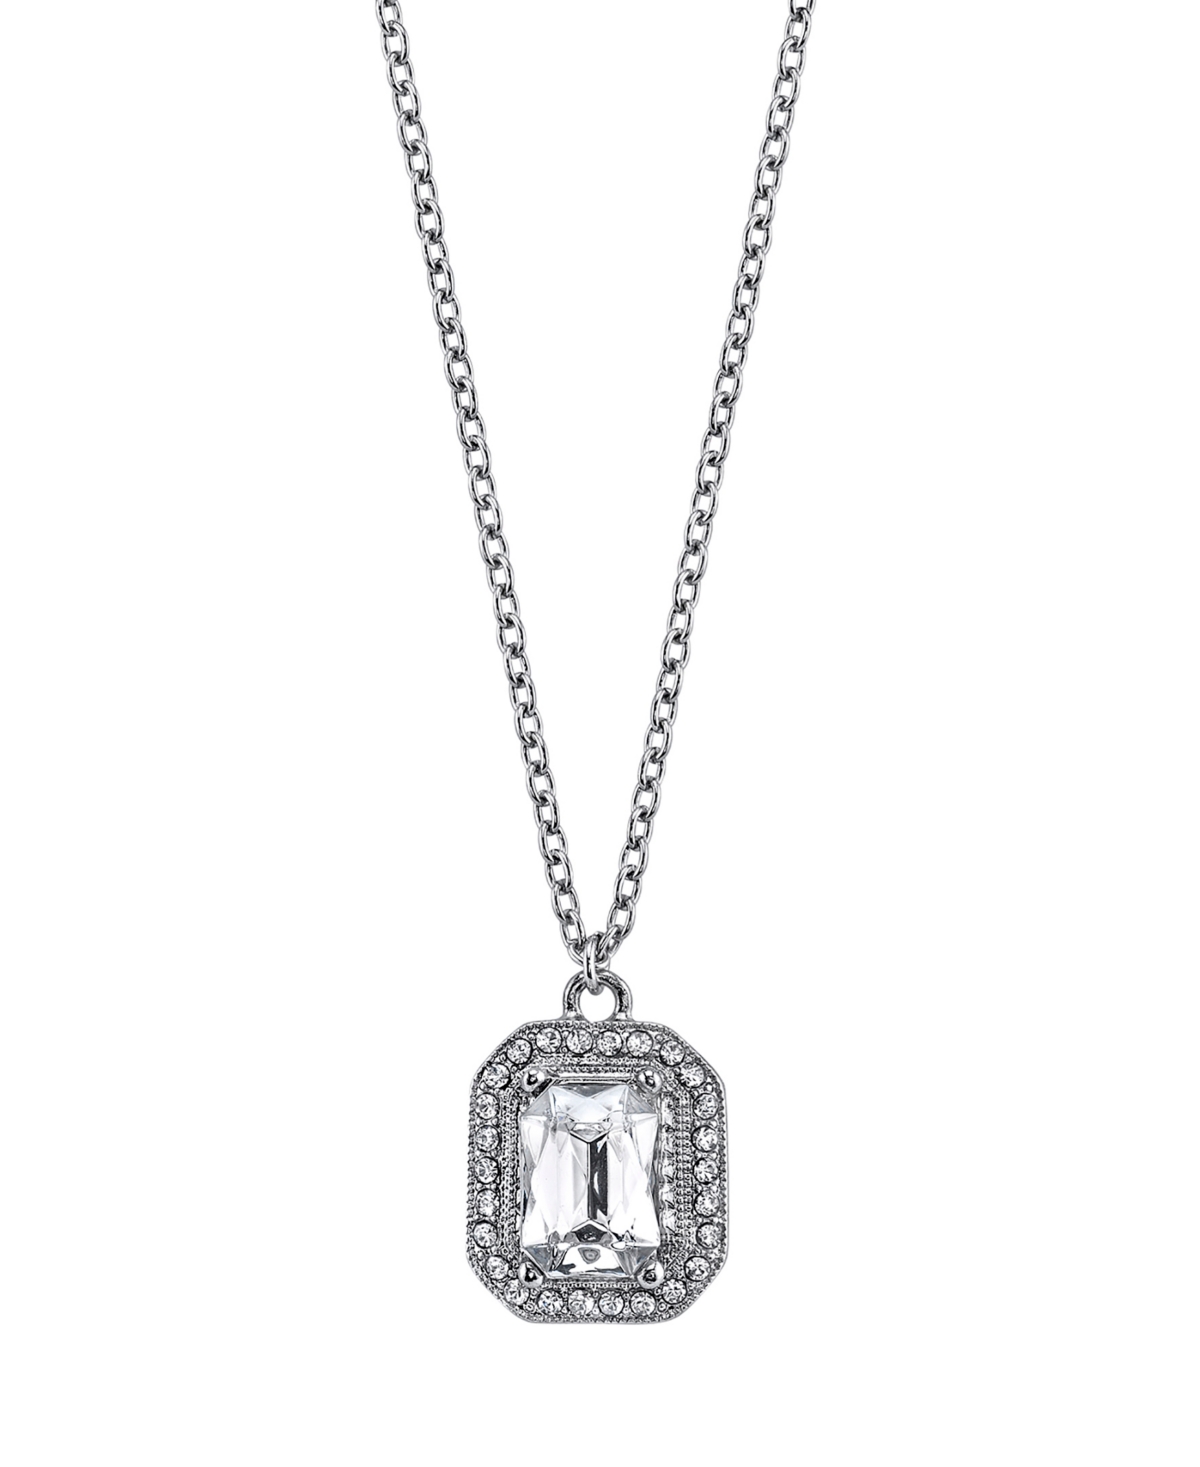 2028 Silver-tone Crystal Octagon Pendant Necklace 16" Adjustable In White